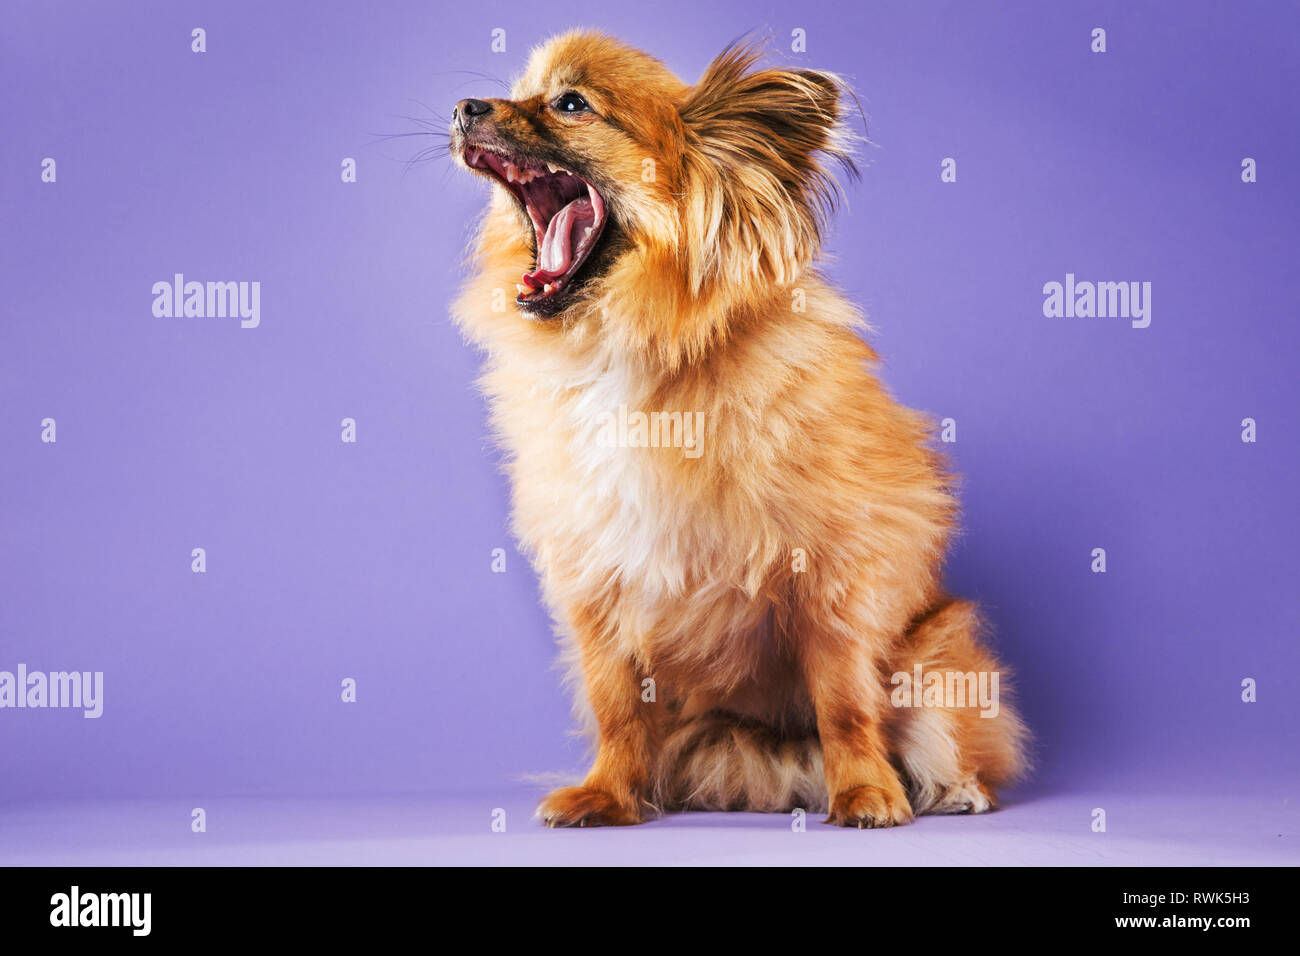 Full-body portrait of a Pomeranian-mix dog with mouth wide-open on a soft purple background. Stock Photo